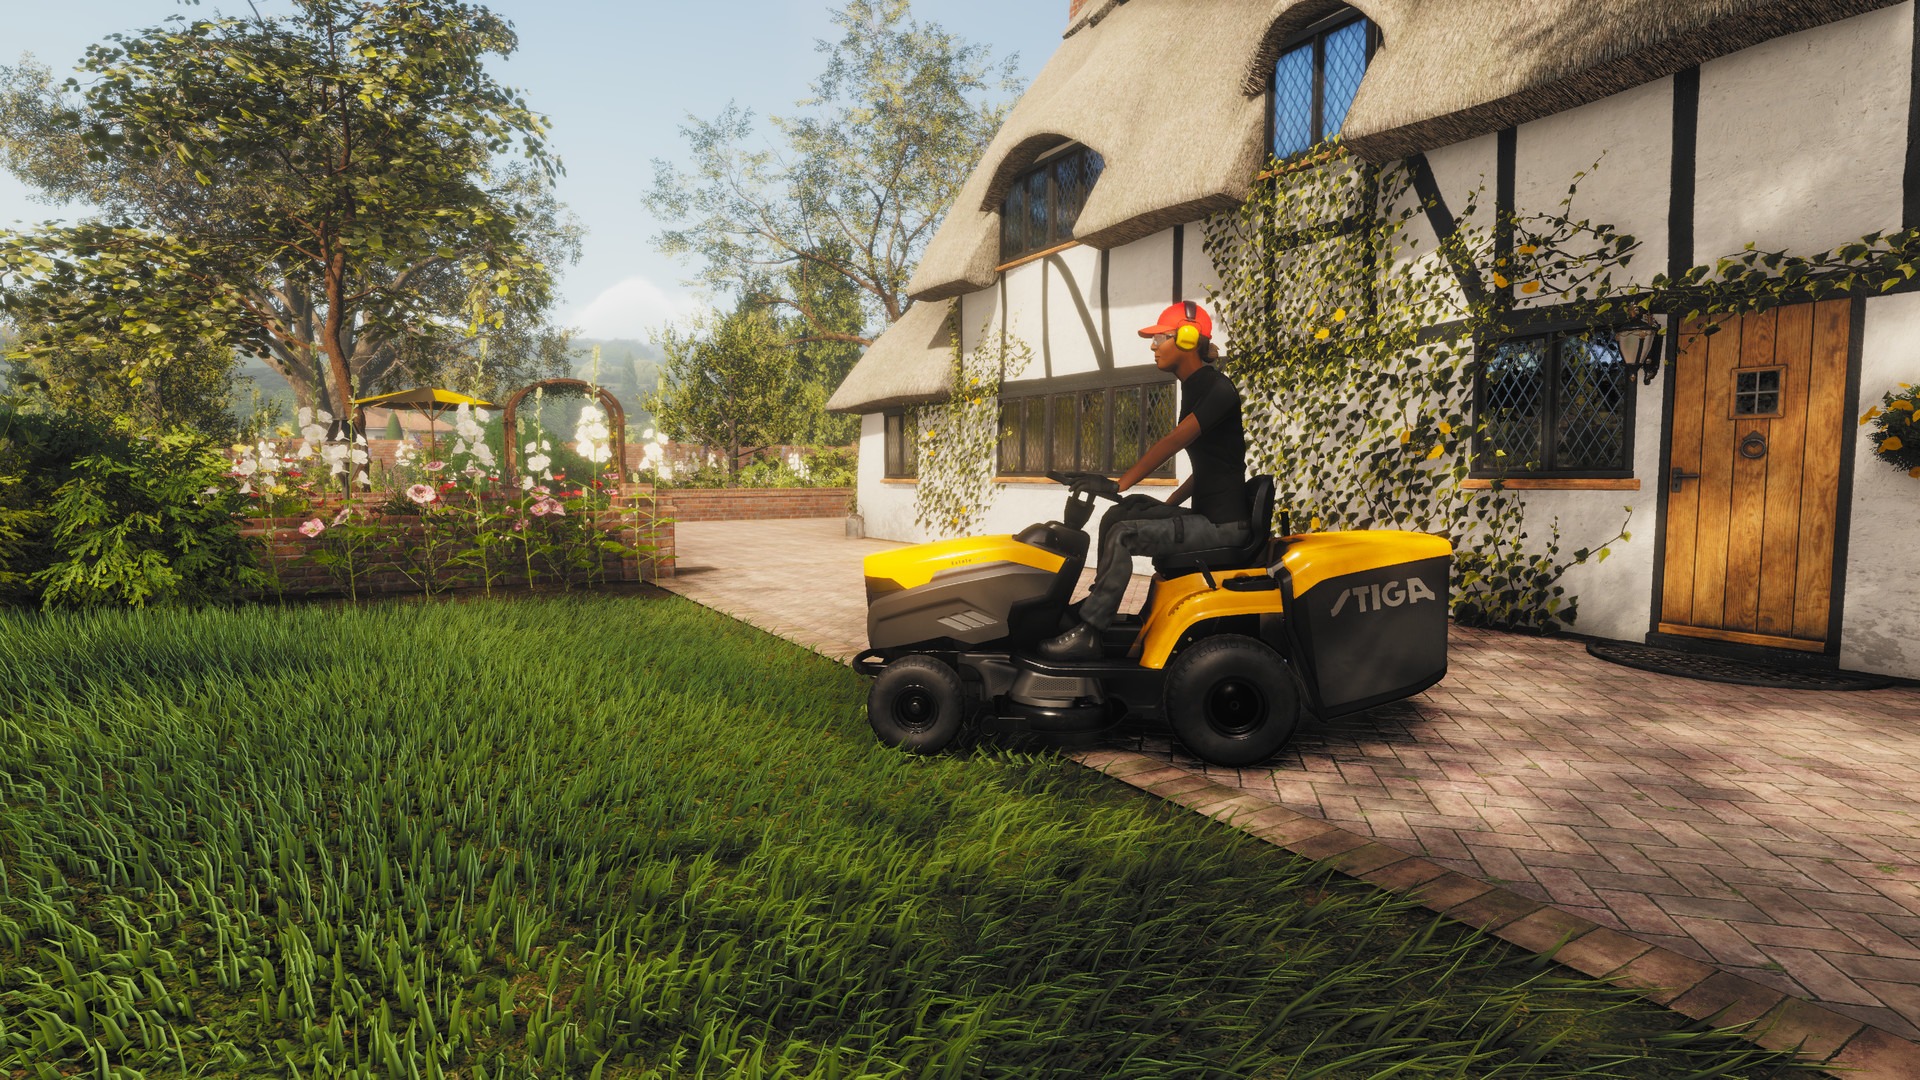 Game: Lawn Mowing Simulator Review